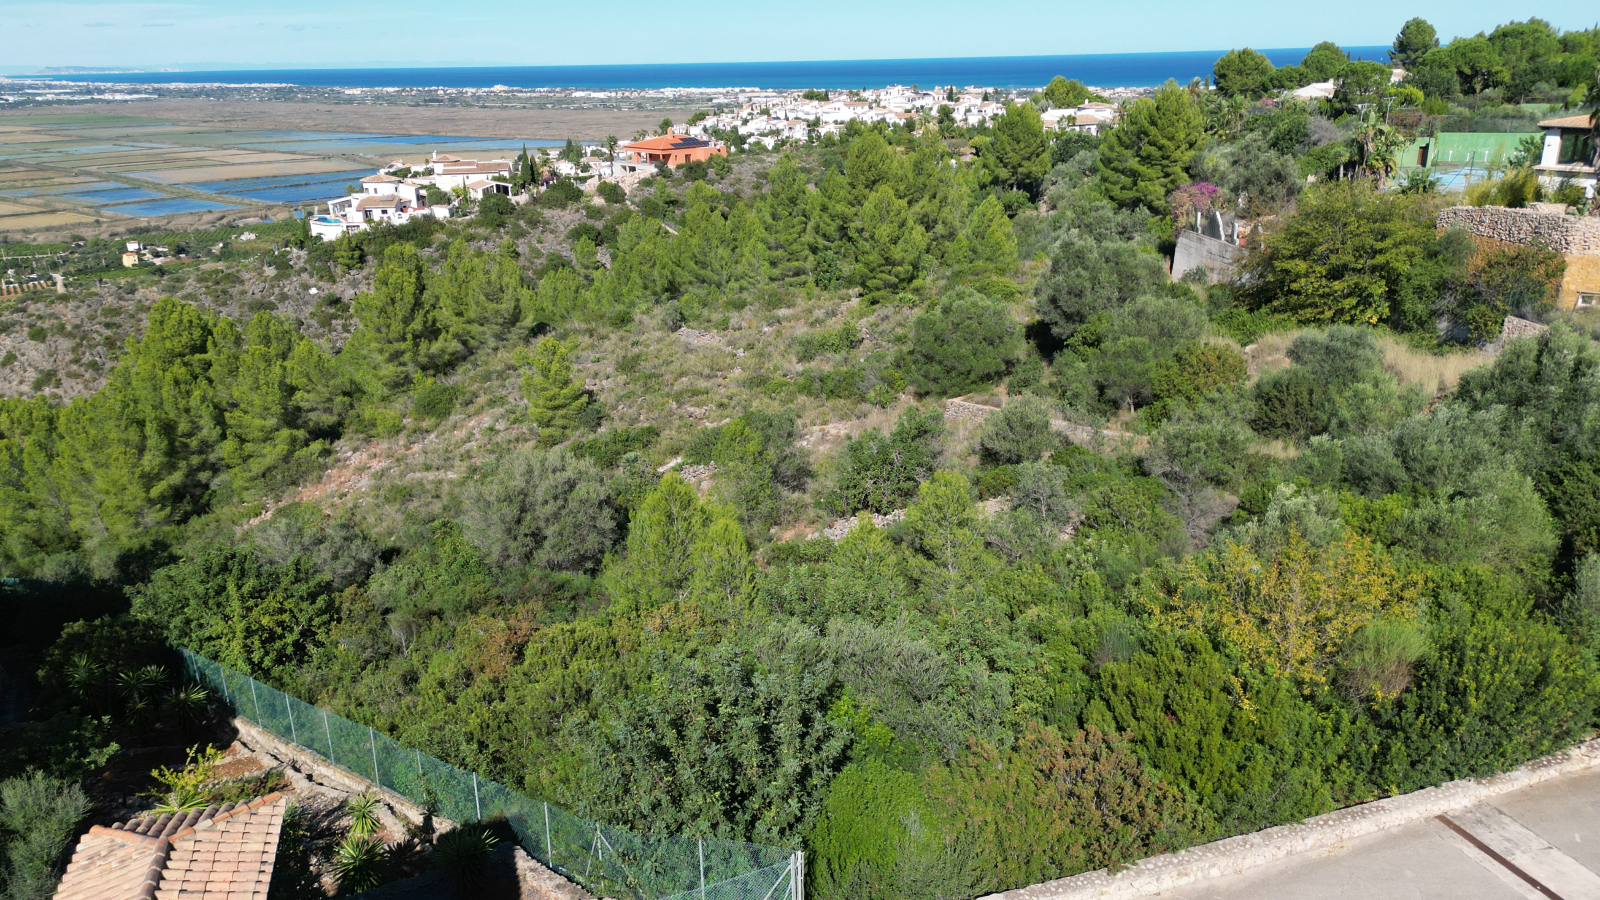 Fantastic building plot (gap) at the end of a dead end road surrounded by luxury villas on Monte Pego